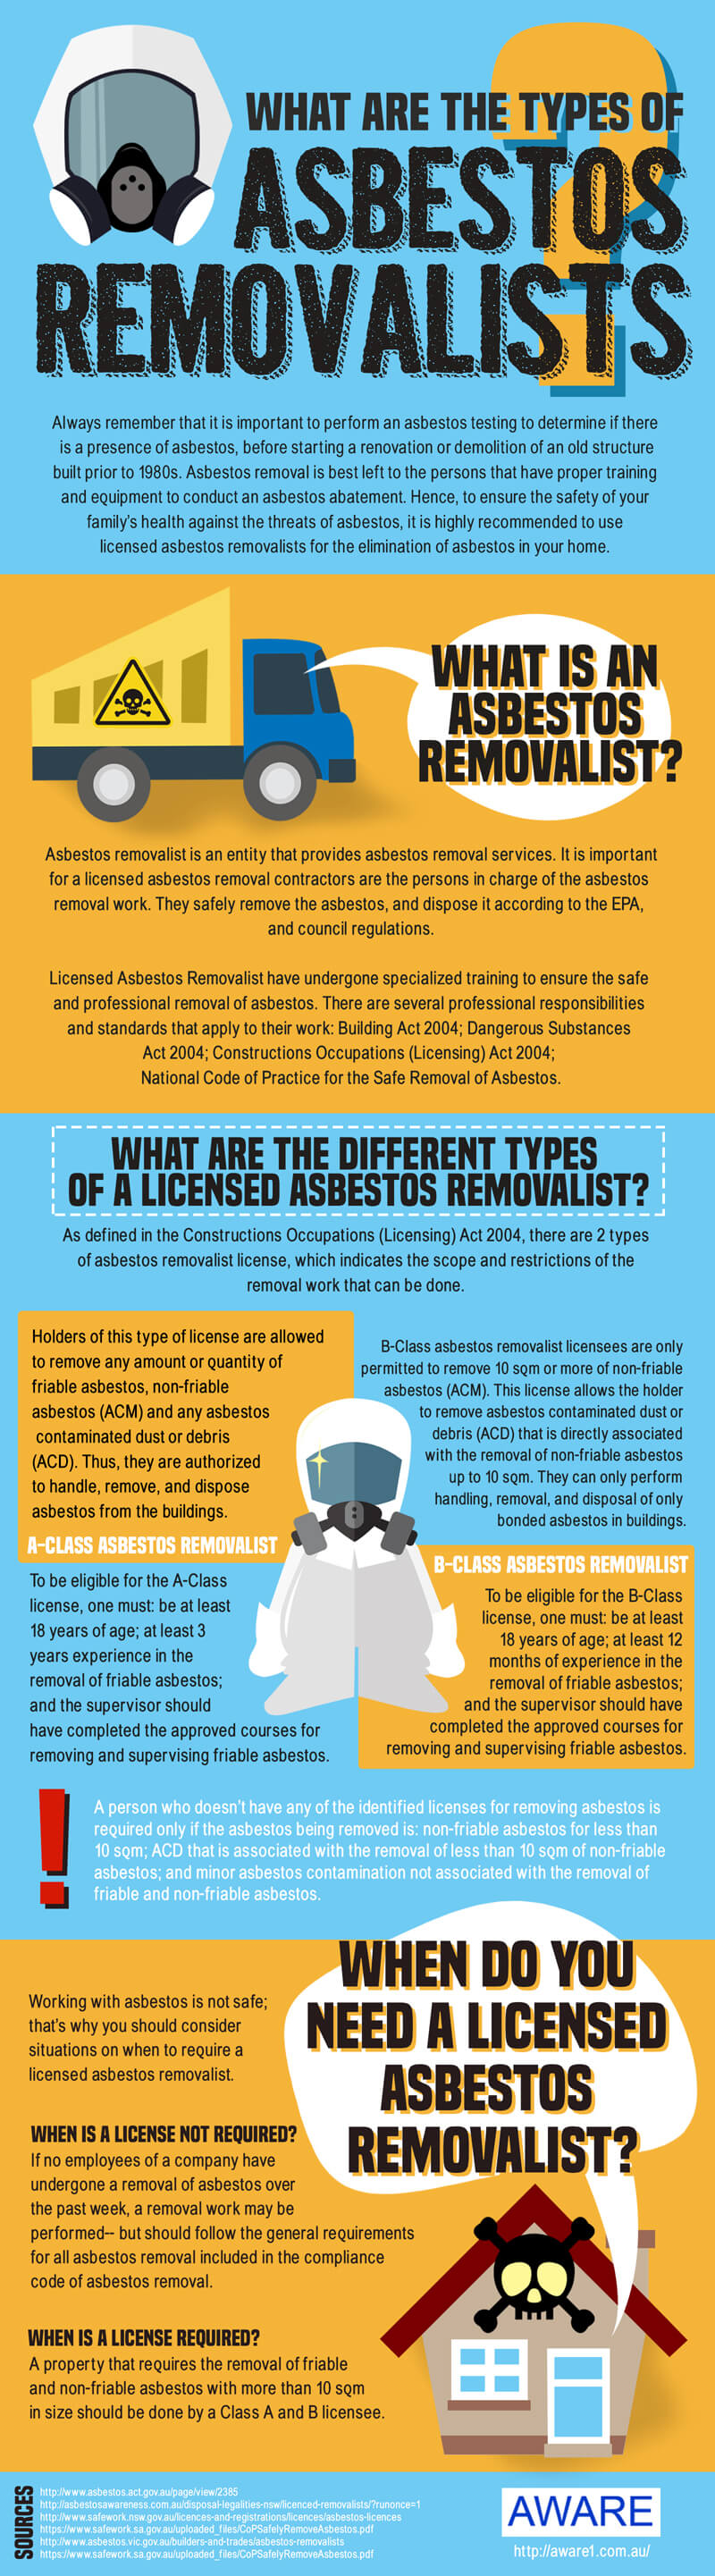 ASBESTOS-REMOVALISTS-types-infographic-plaza